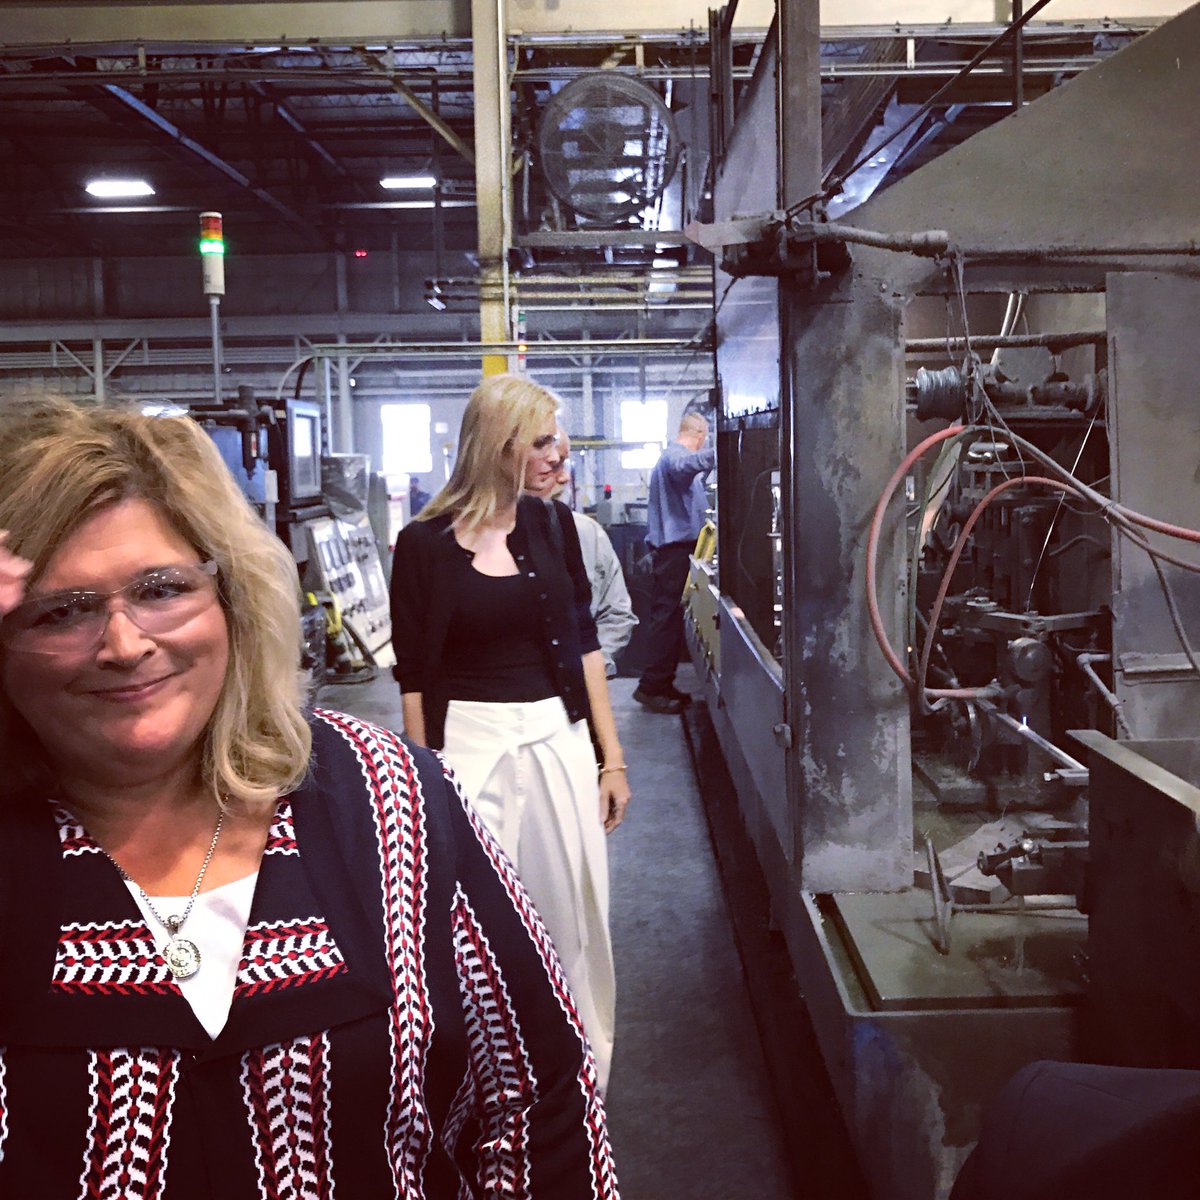 Thank you Angie Phillips for inviting me to tour your plant Middletown Tube Works. #Ohio https://t.co/fUKiiEIBXT